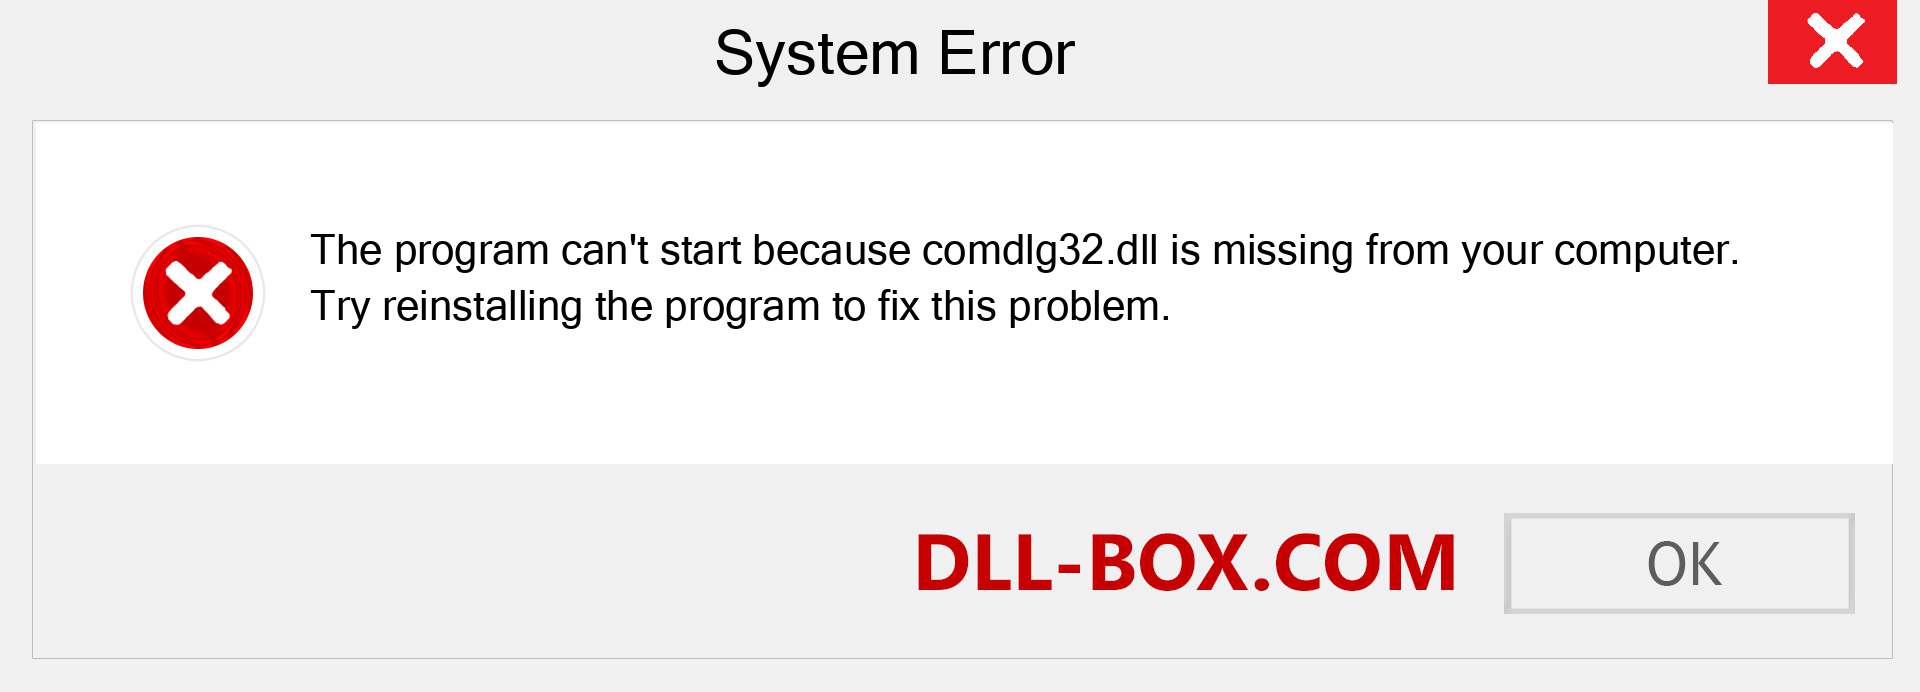  comdlg32.dll file is missing?. Download for Windows 7, 8, 10 - Fix  comdlg32 dll Missing Error on Windows, photos, images